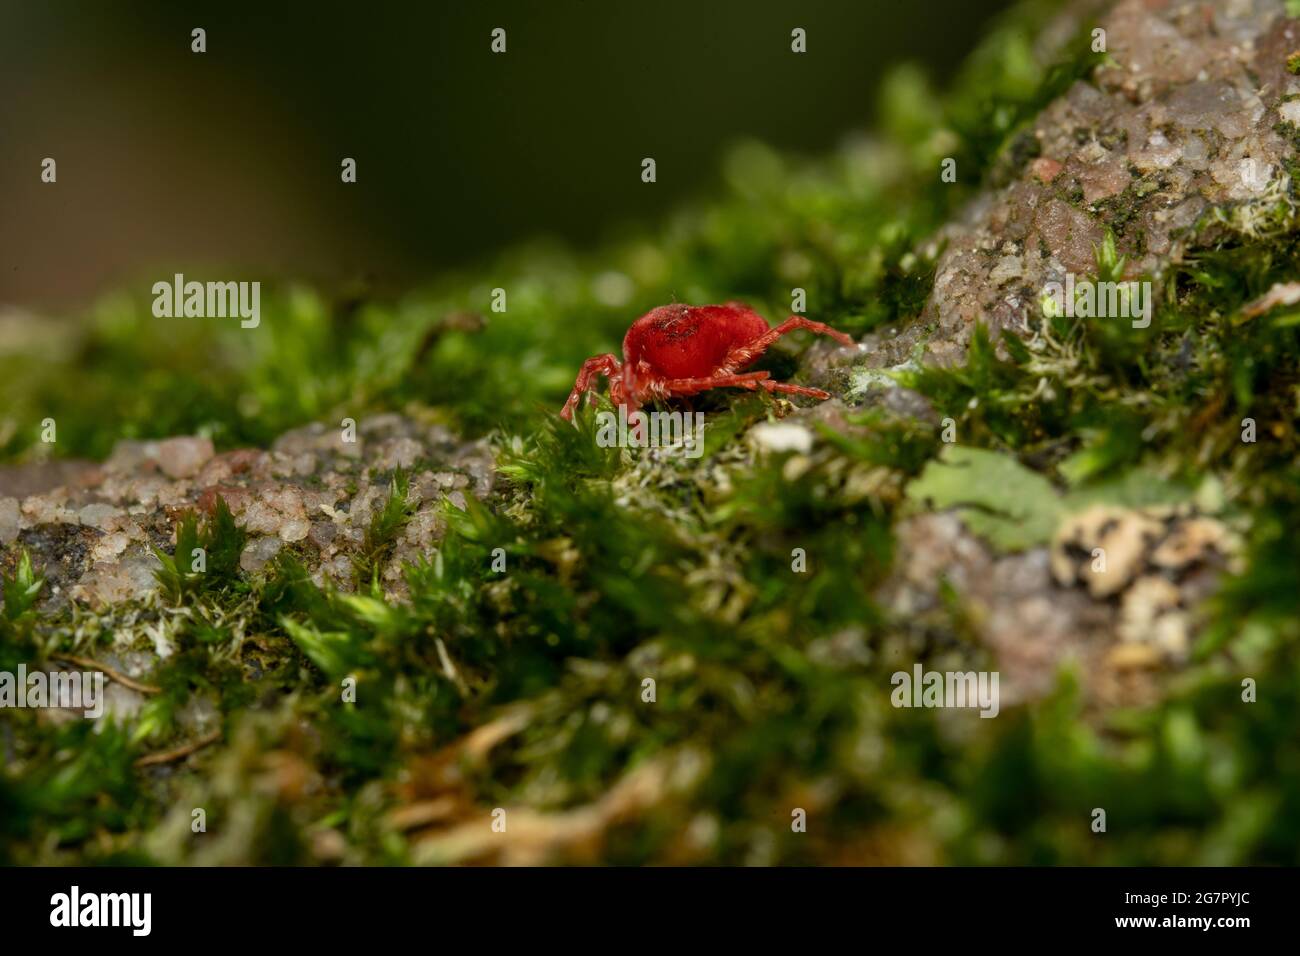 Closeup shot of Trombidiidae red insect walking on a surface slightly covered with grass Stock Photo